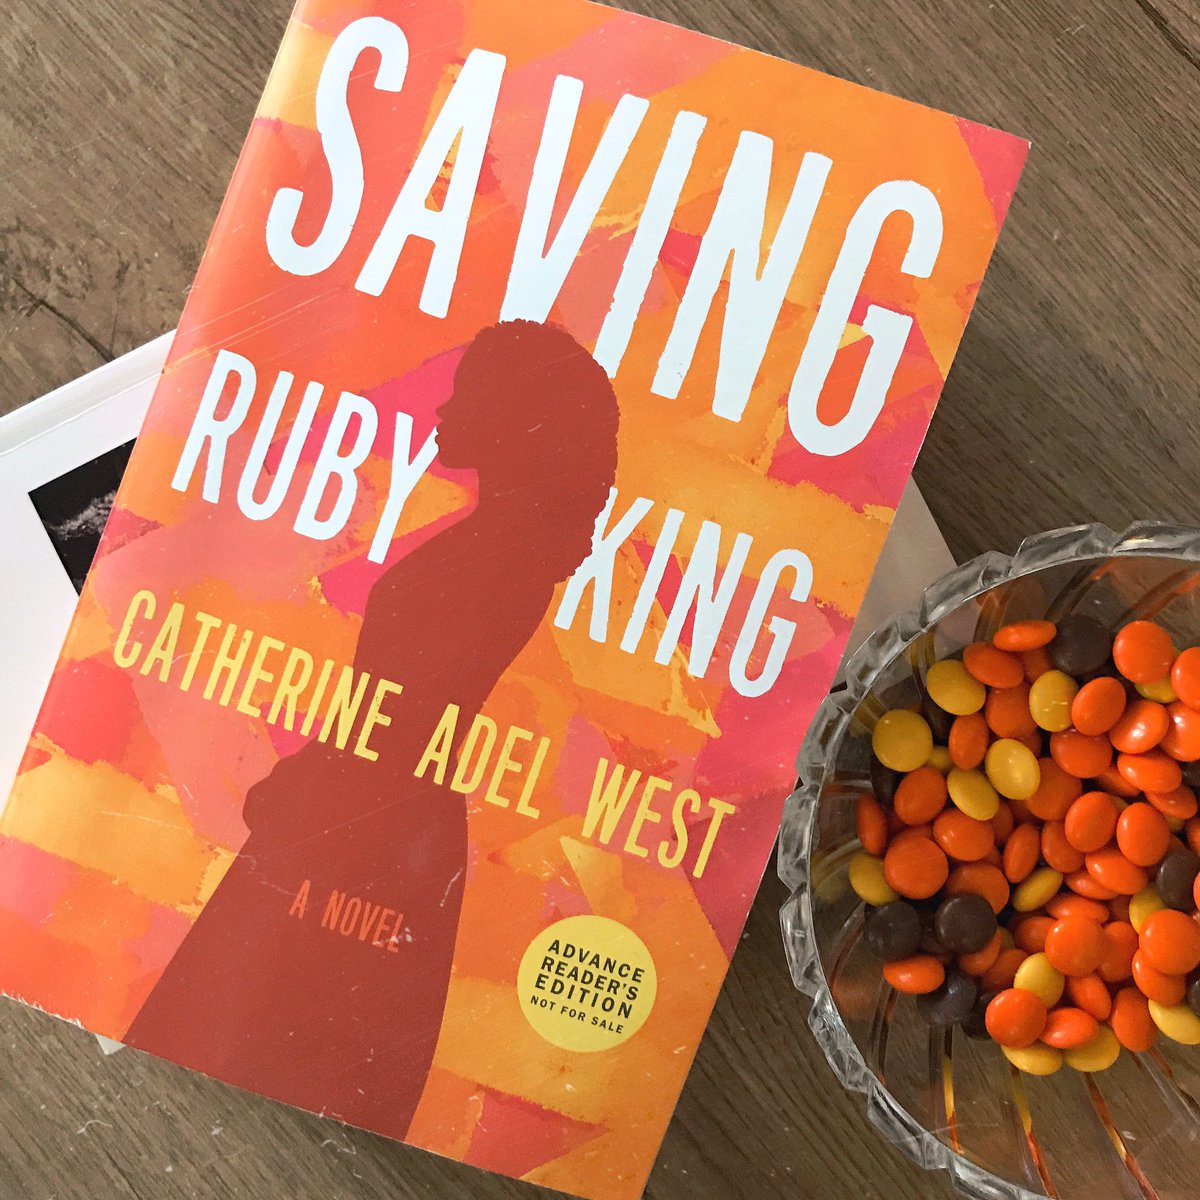 "Saving Ruby King" book by Catherine Adel West